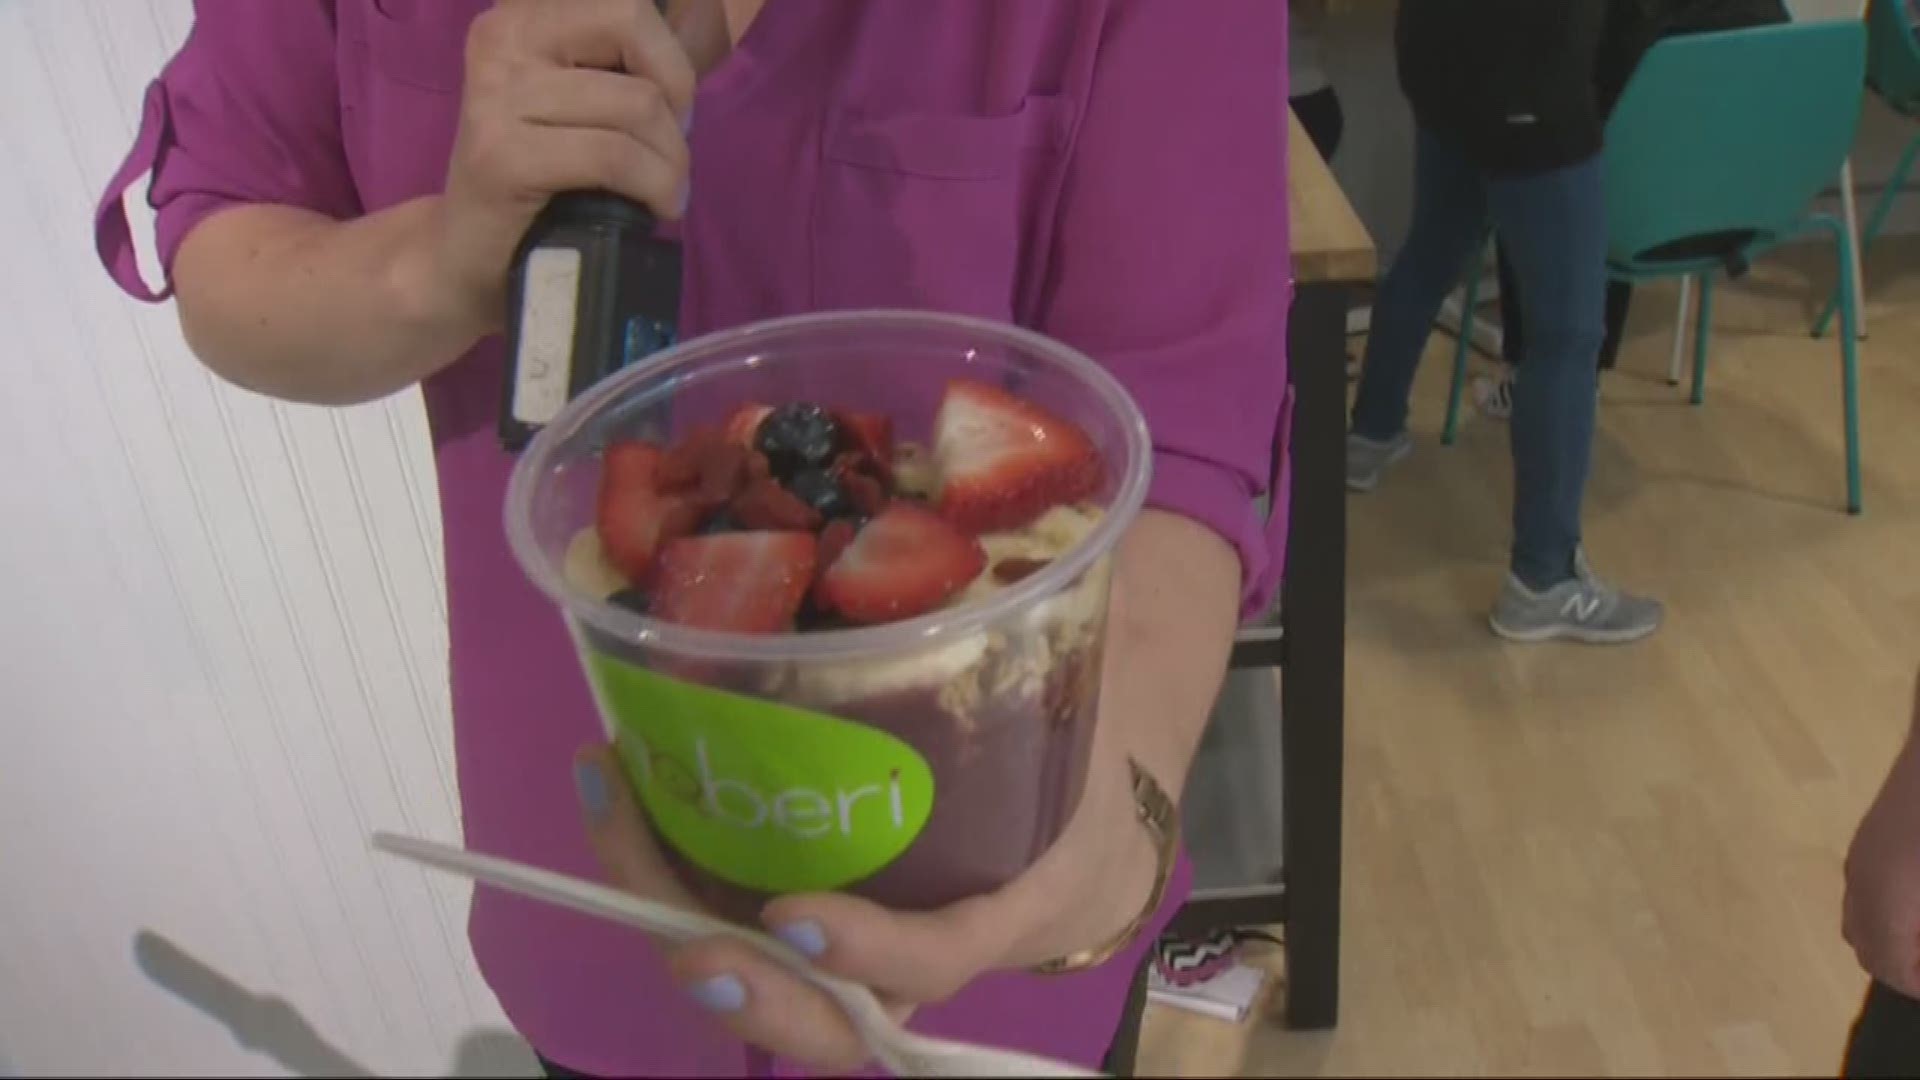 Moberi offers free acai bowls at grand opening